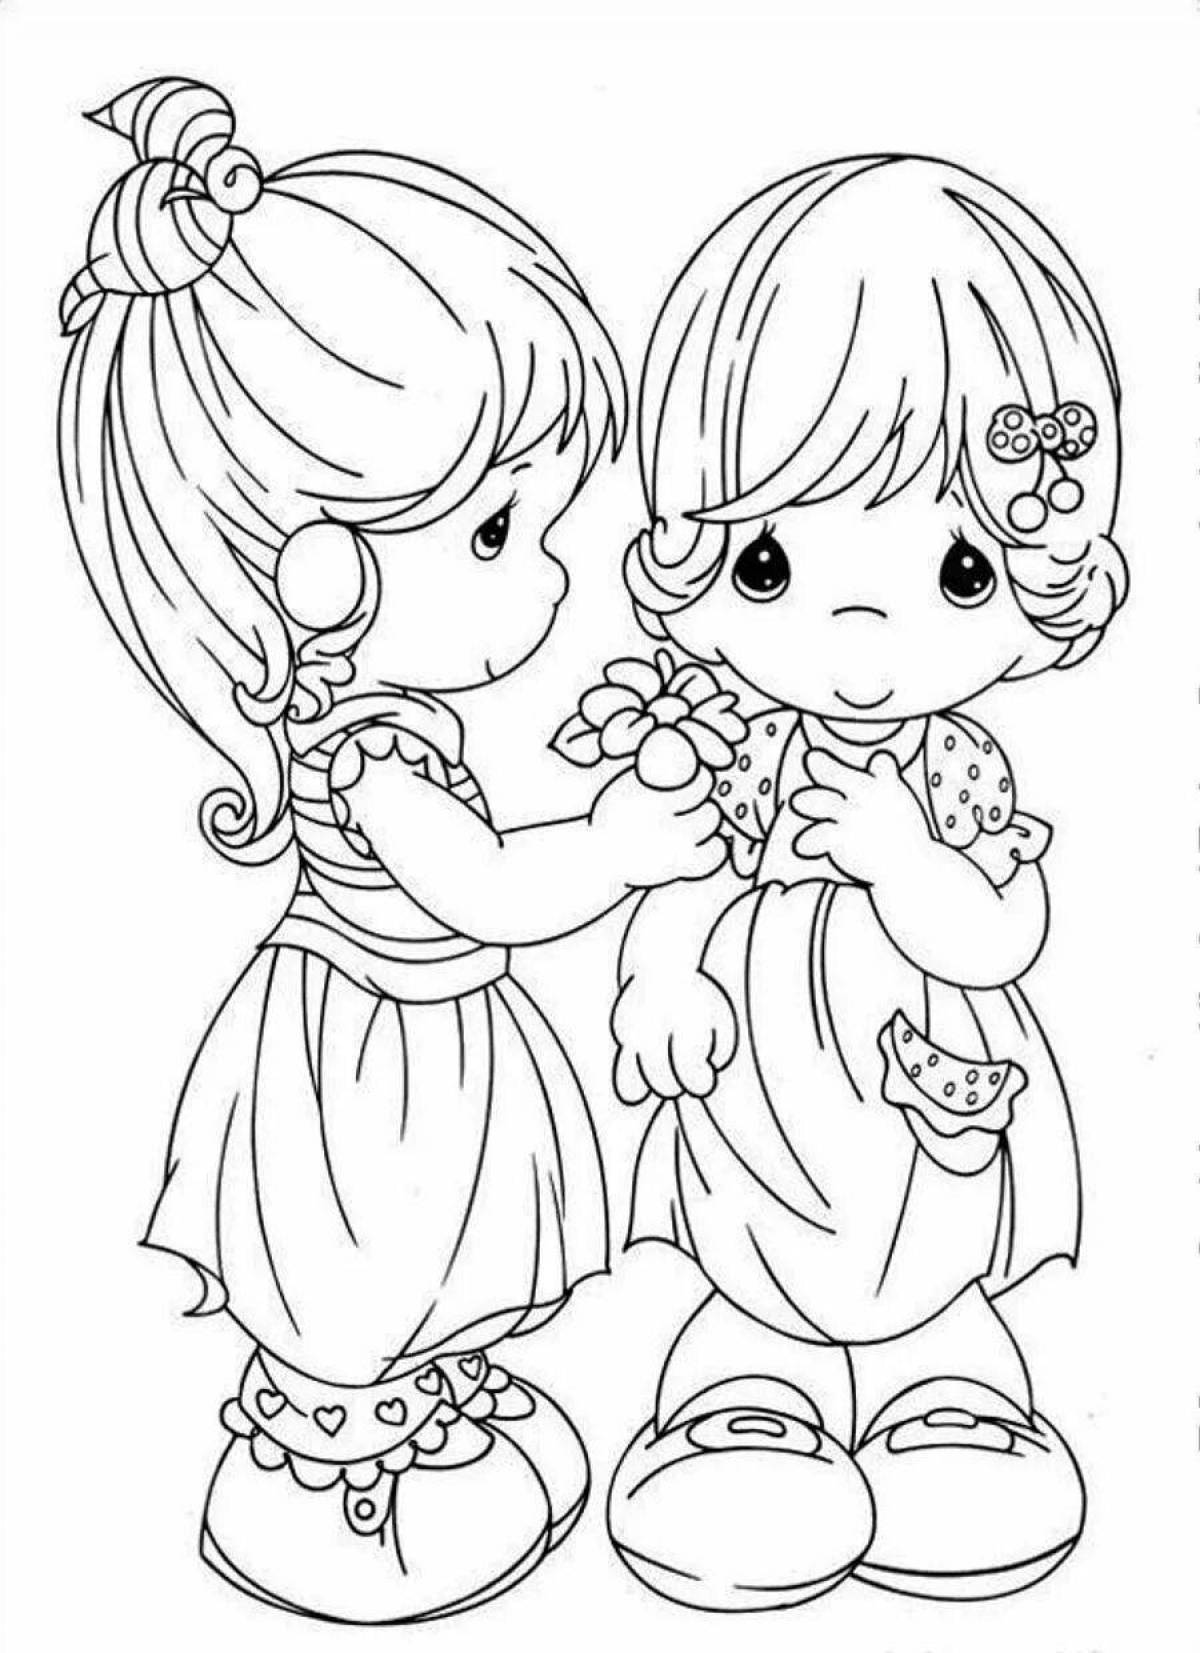 Coloring book for two girls